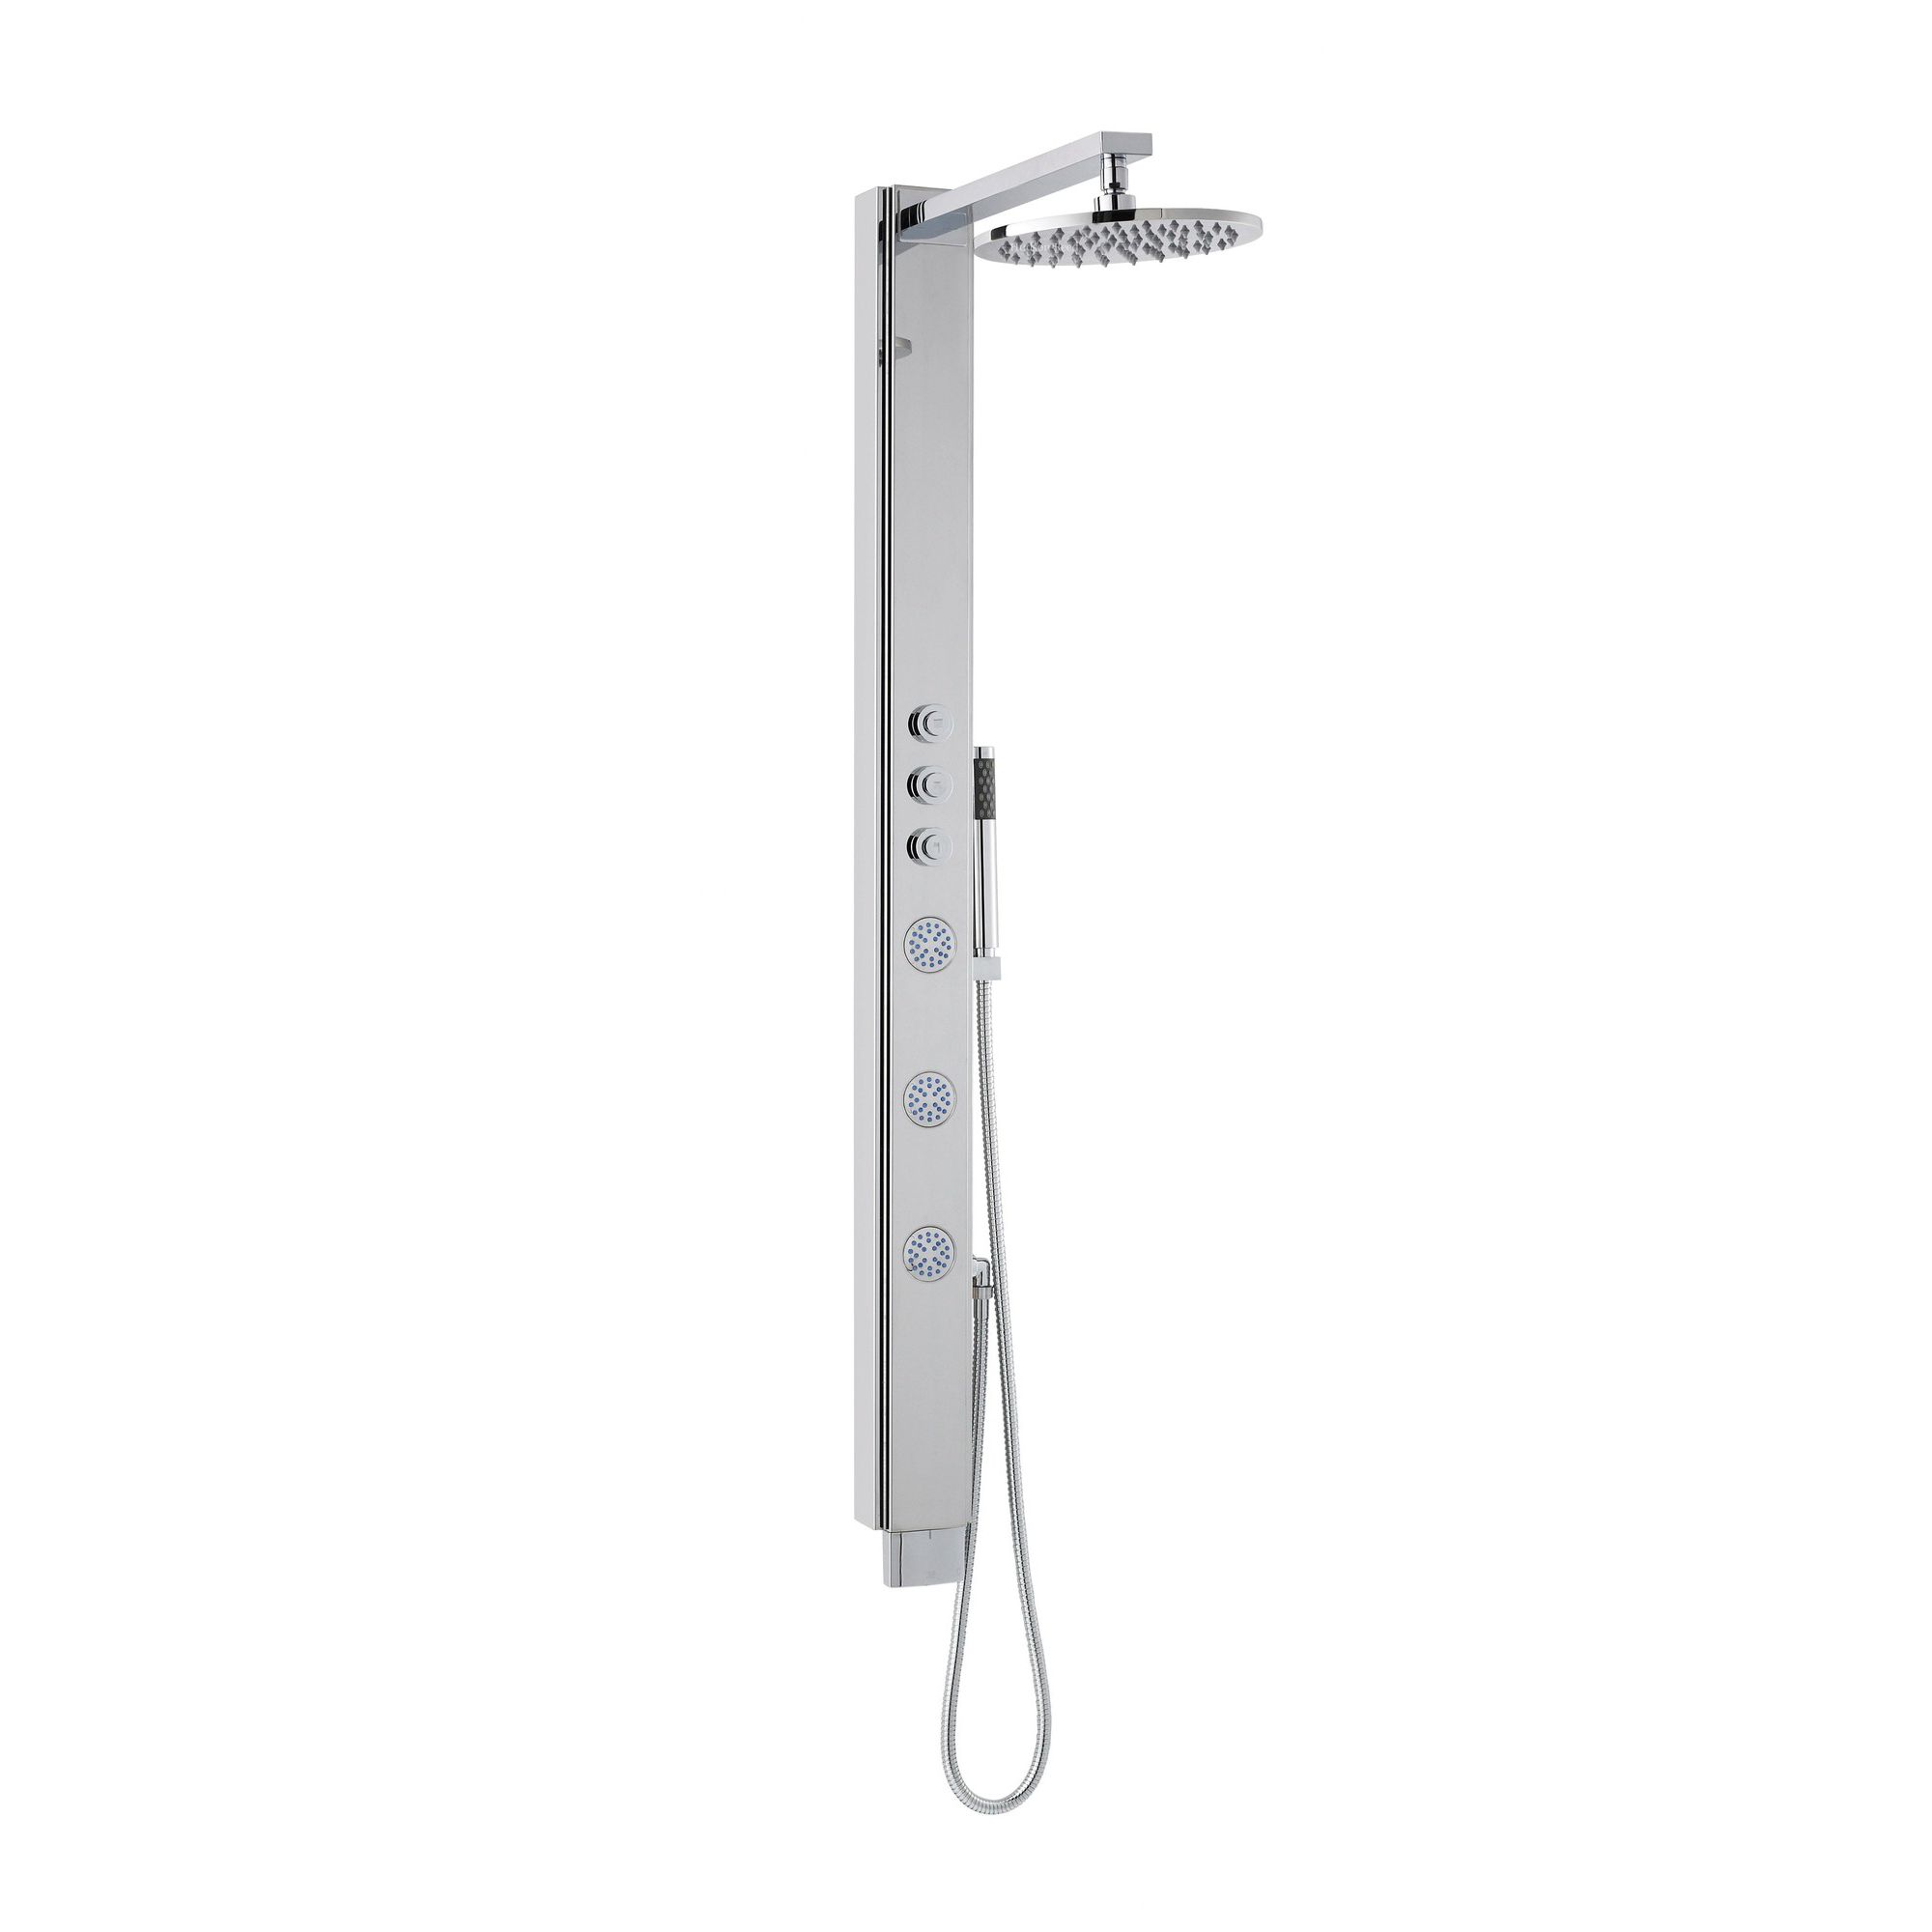 Hudson Reed Imber Thermostatic Shower Panel at Tesco Direct